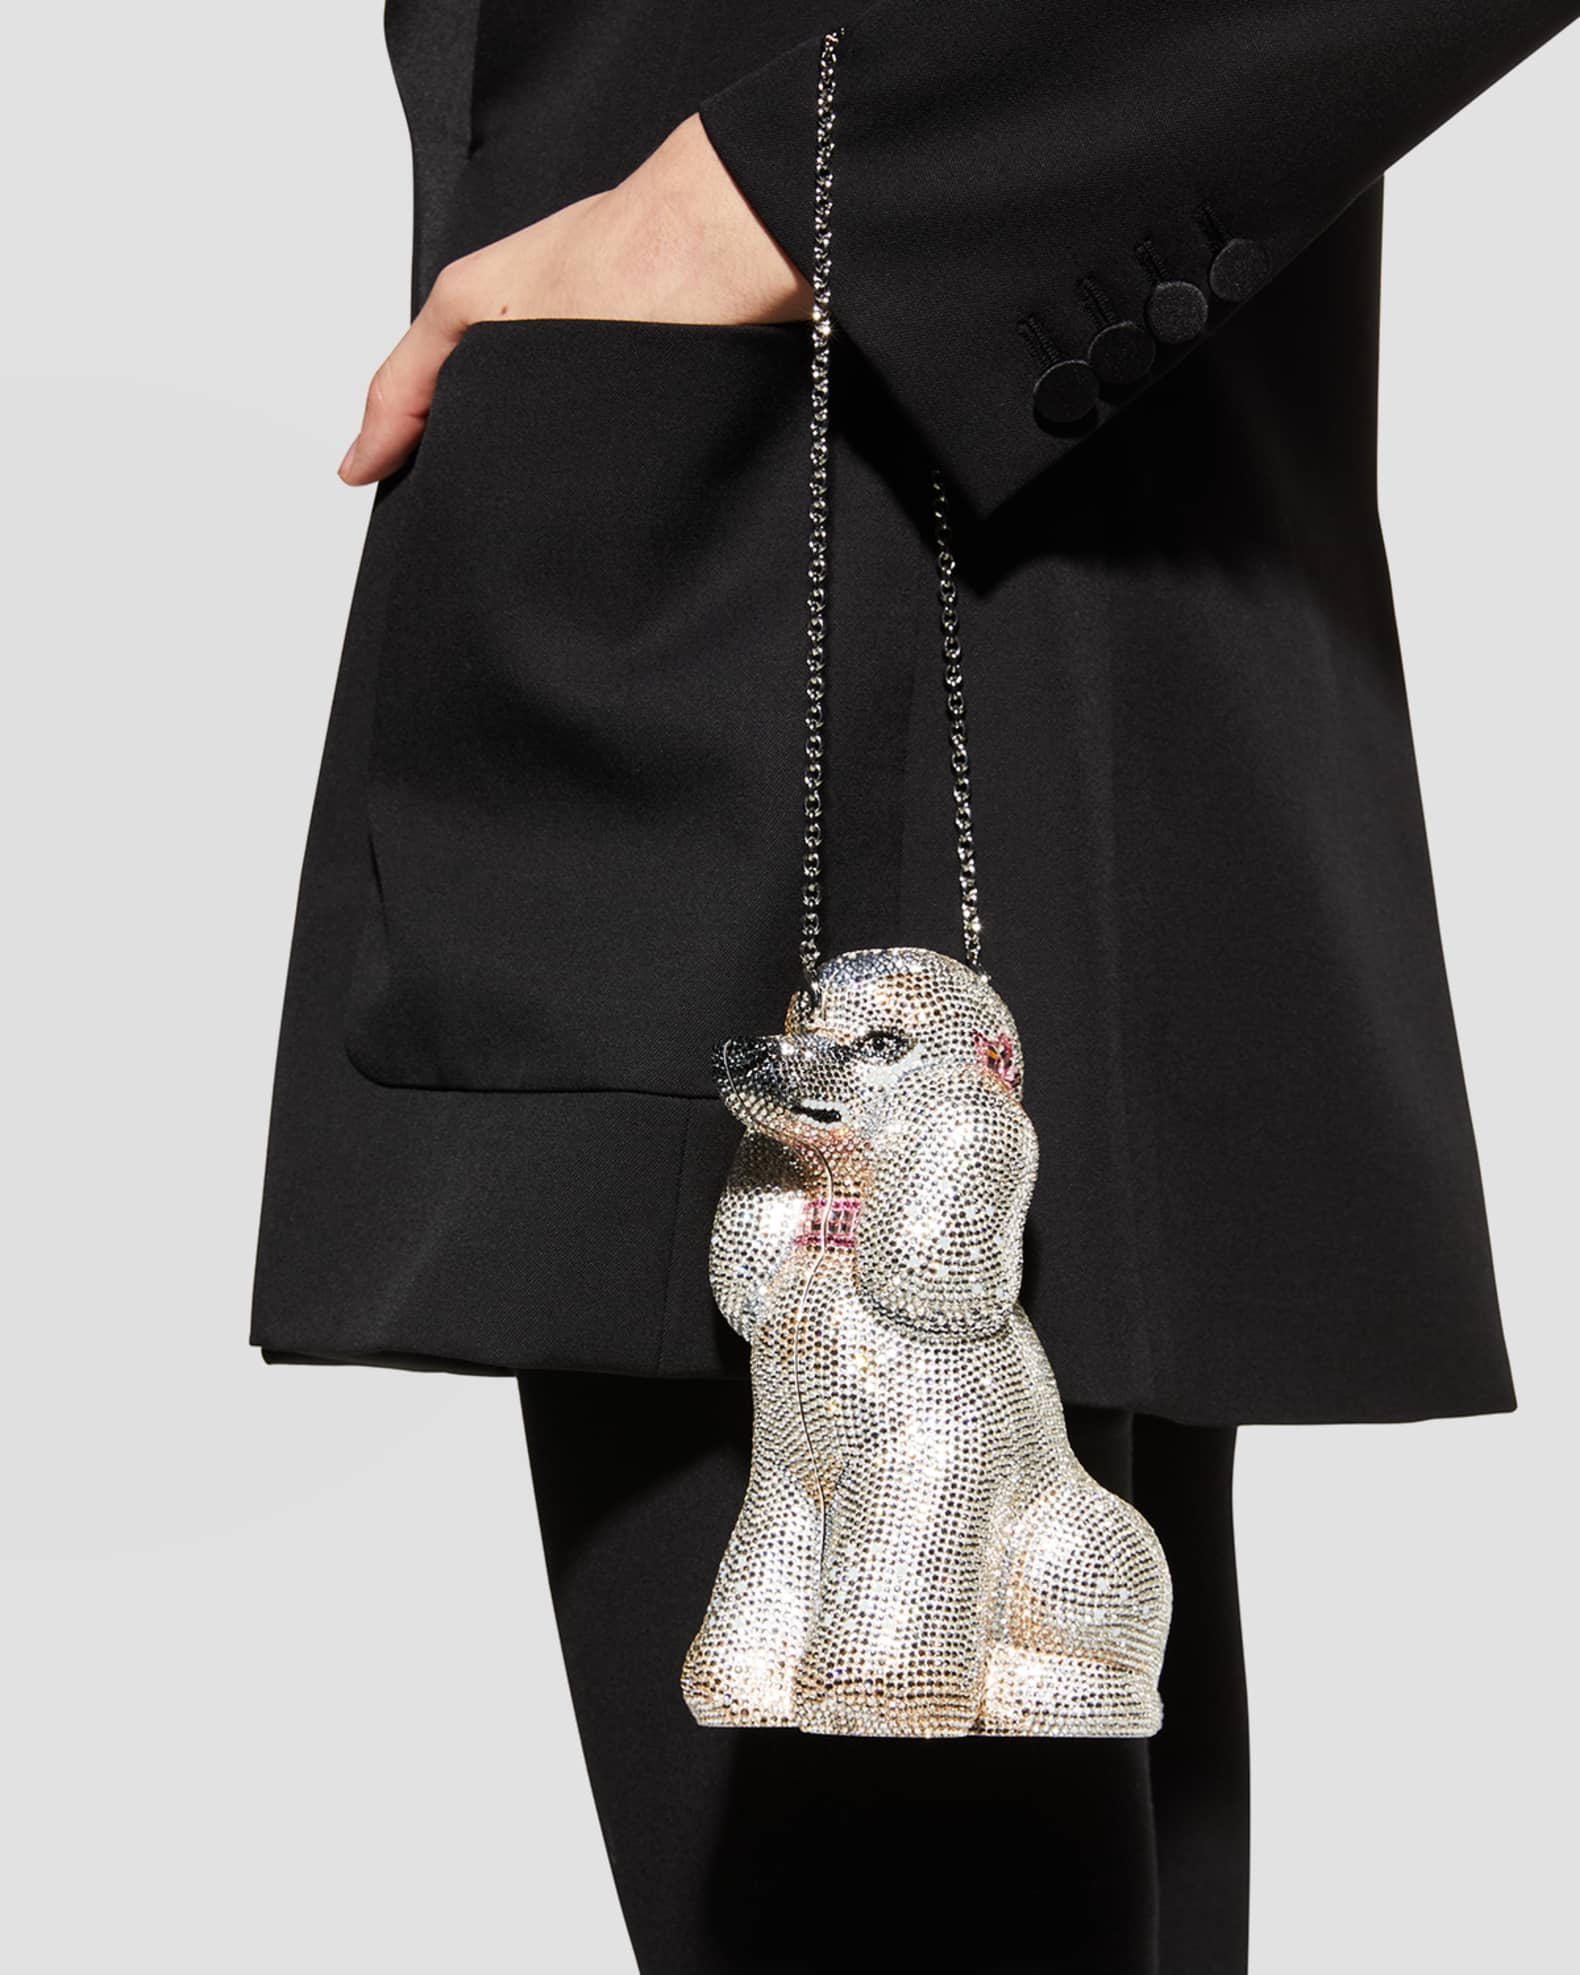 Judith Leiber French Poodle Fifi Clutch Bag